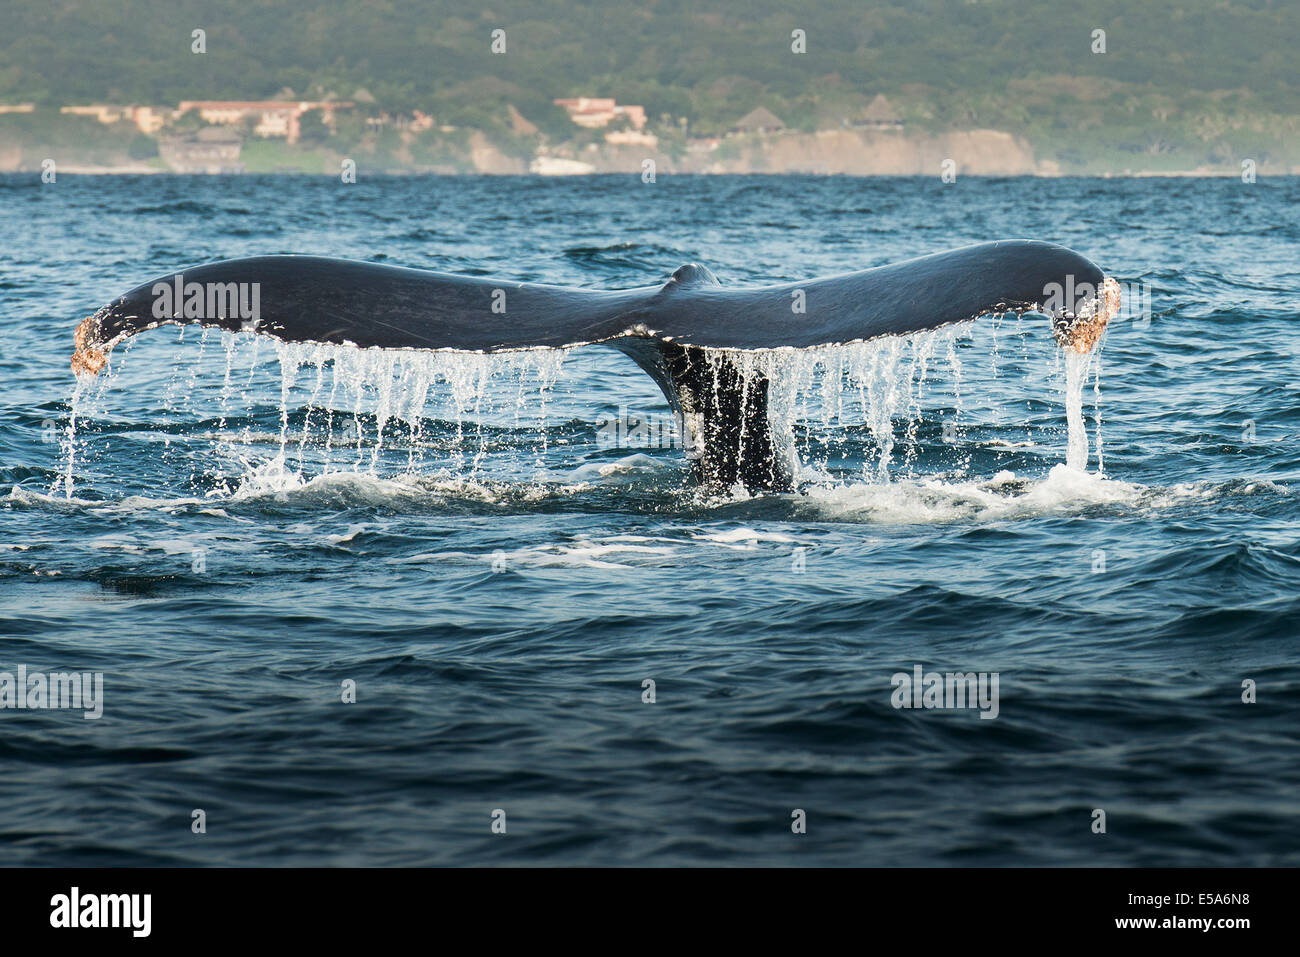 Whale lifting its tail out of water Stock Photo